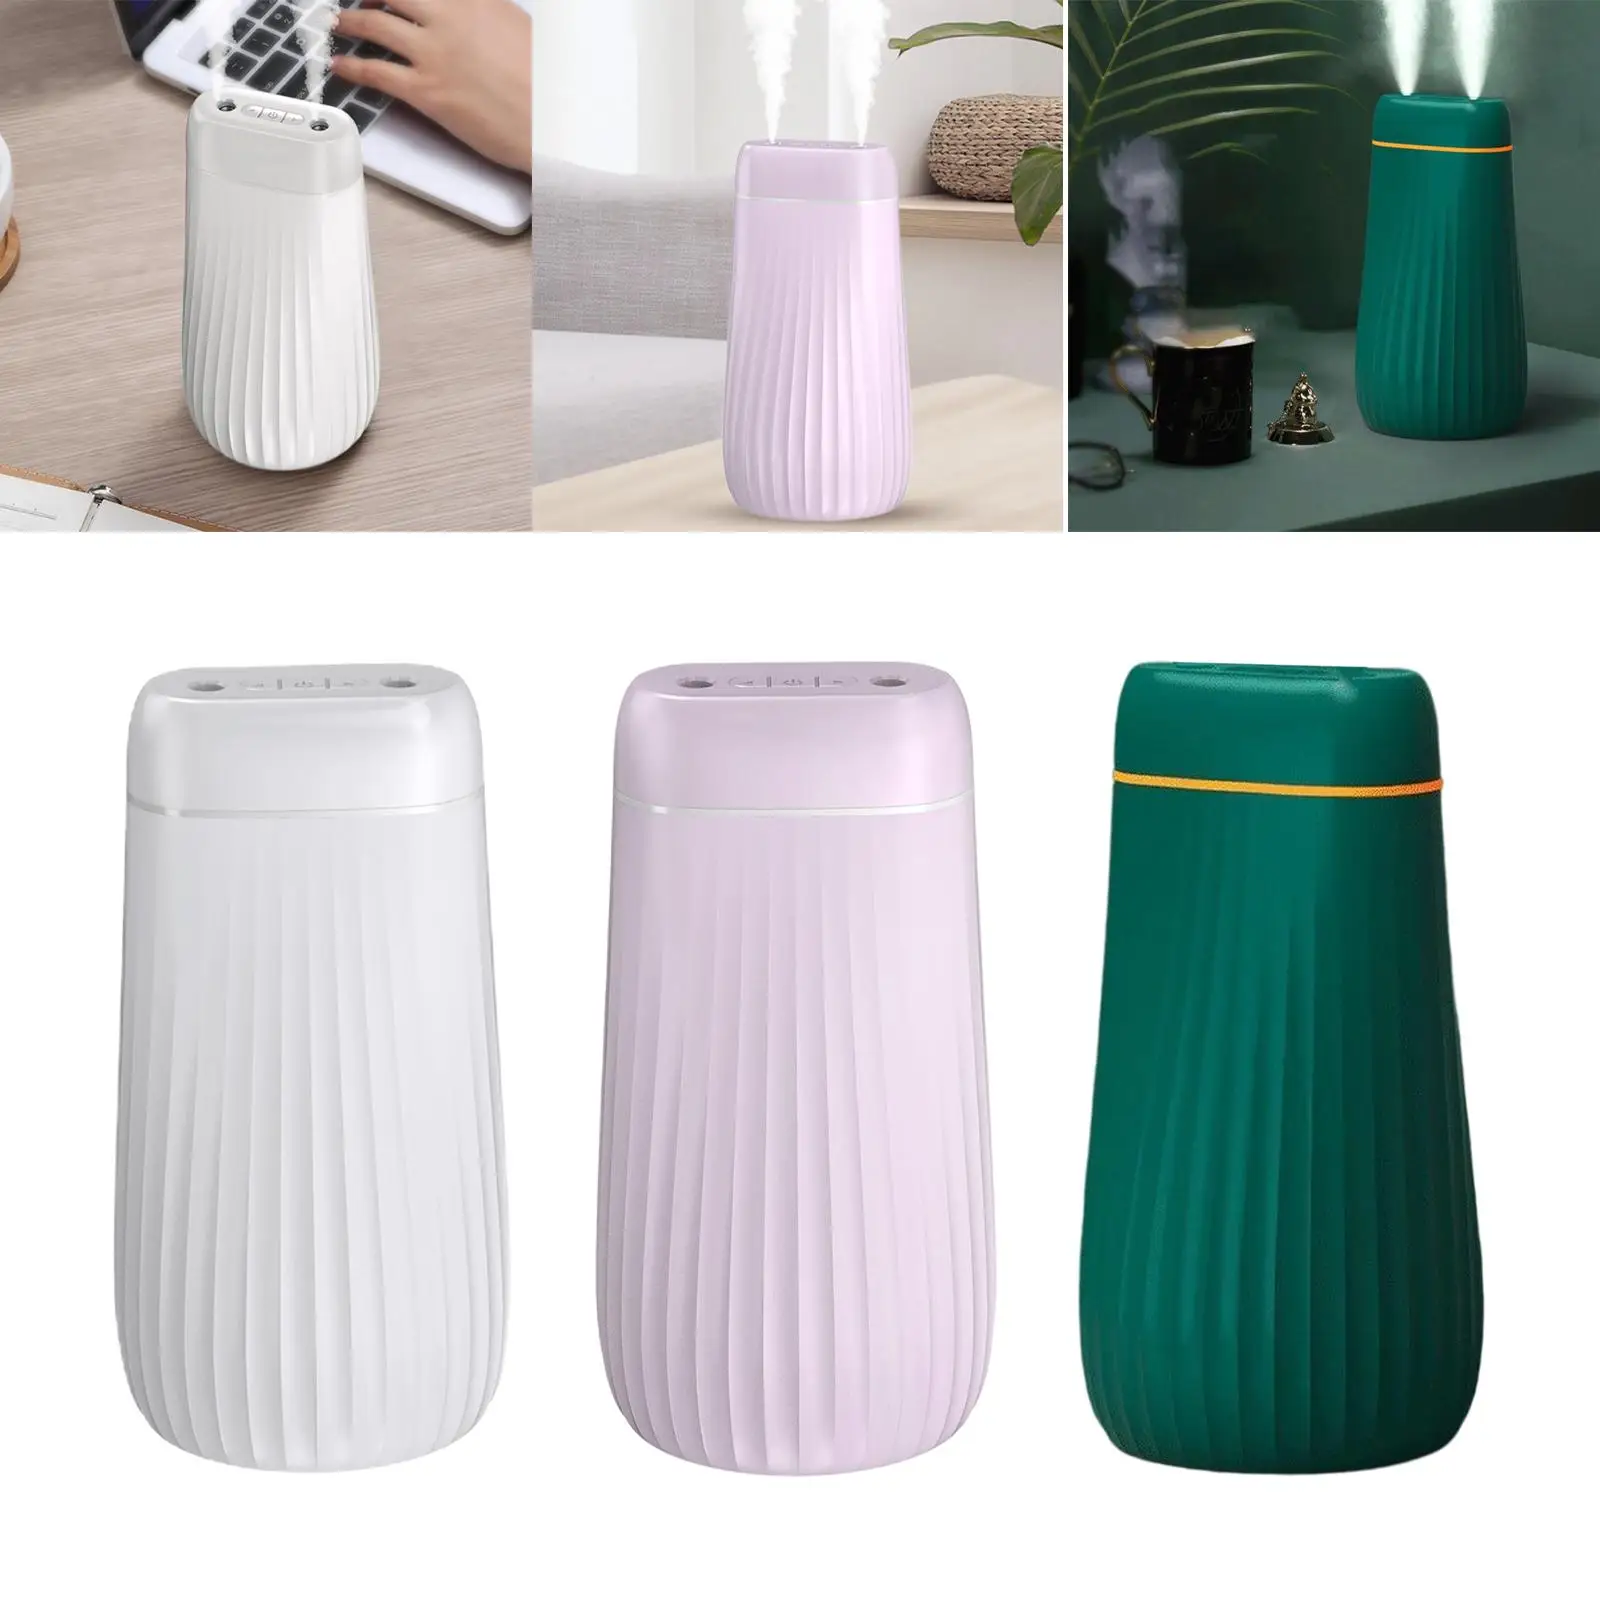 1L Cool Mist Humidifier Essential Oil Diffuser for Home Hotel Car Restaurant Office